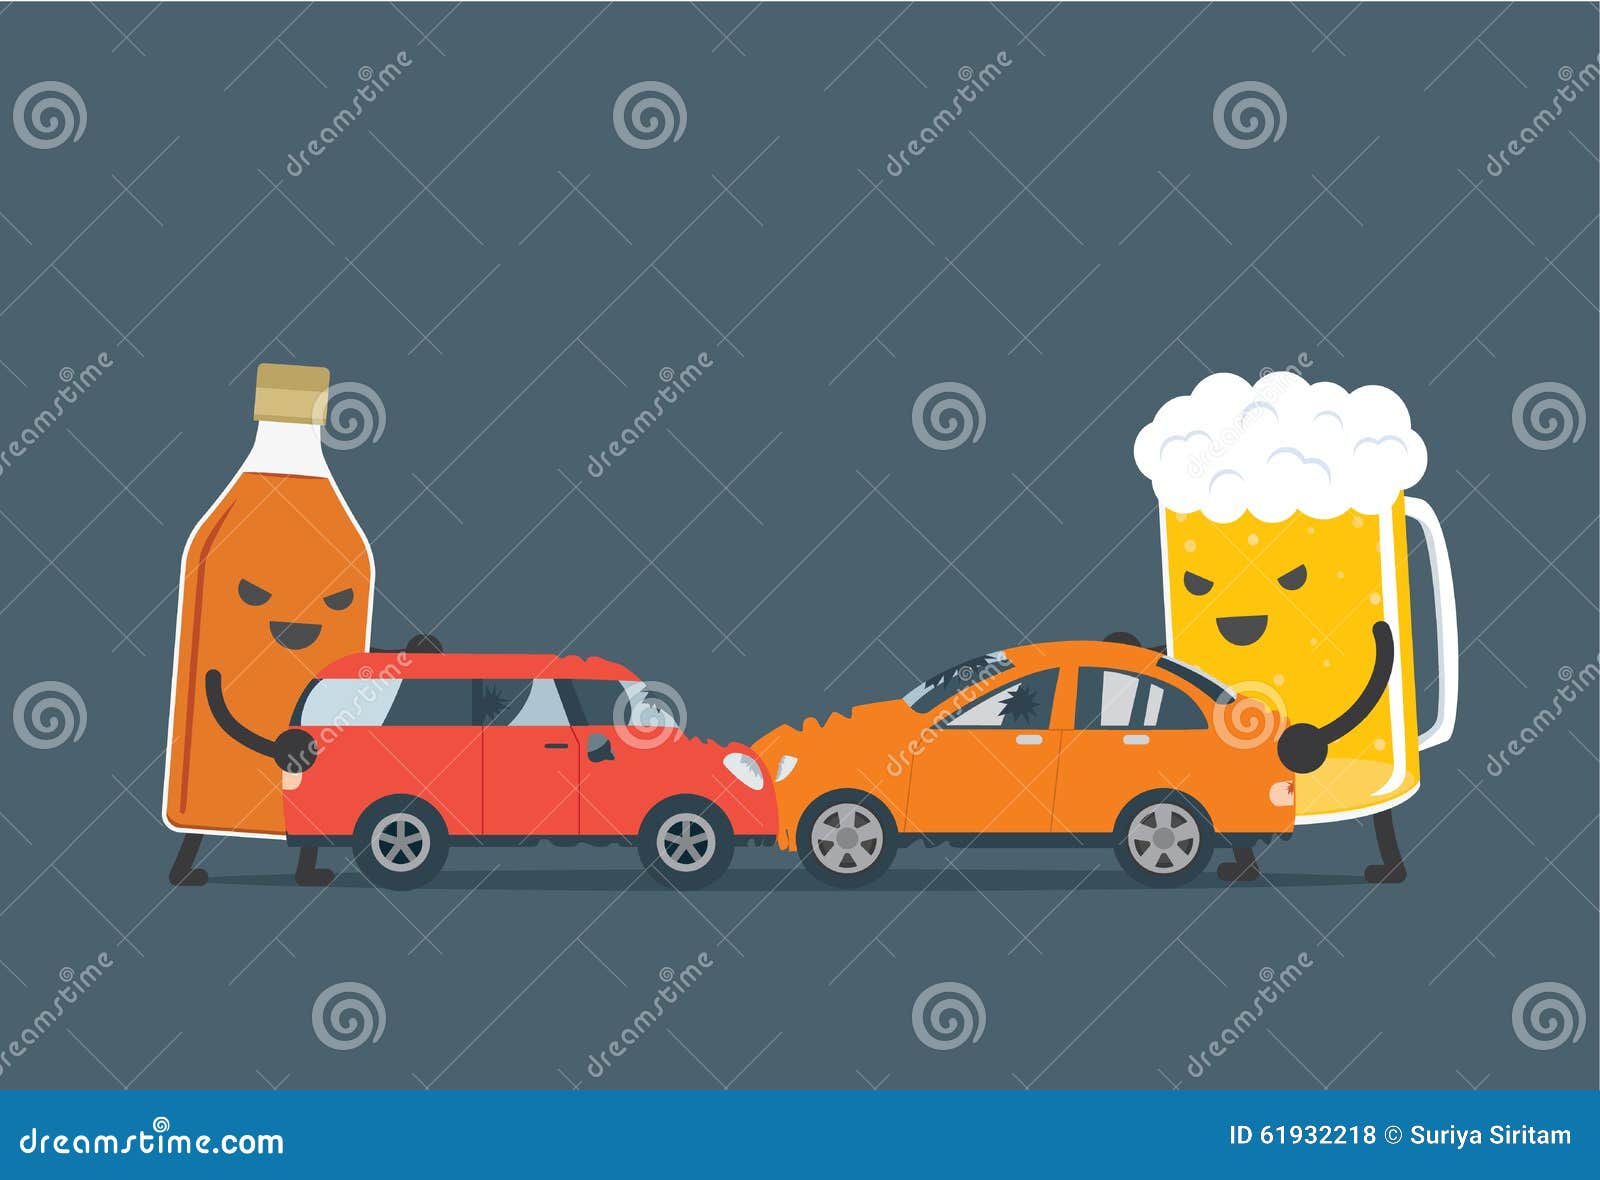 Alcohol make car accident stock vector. Illustration of accident